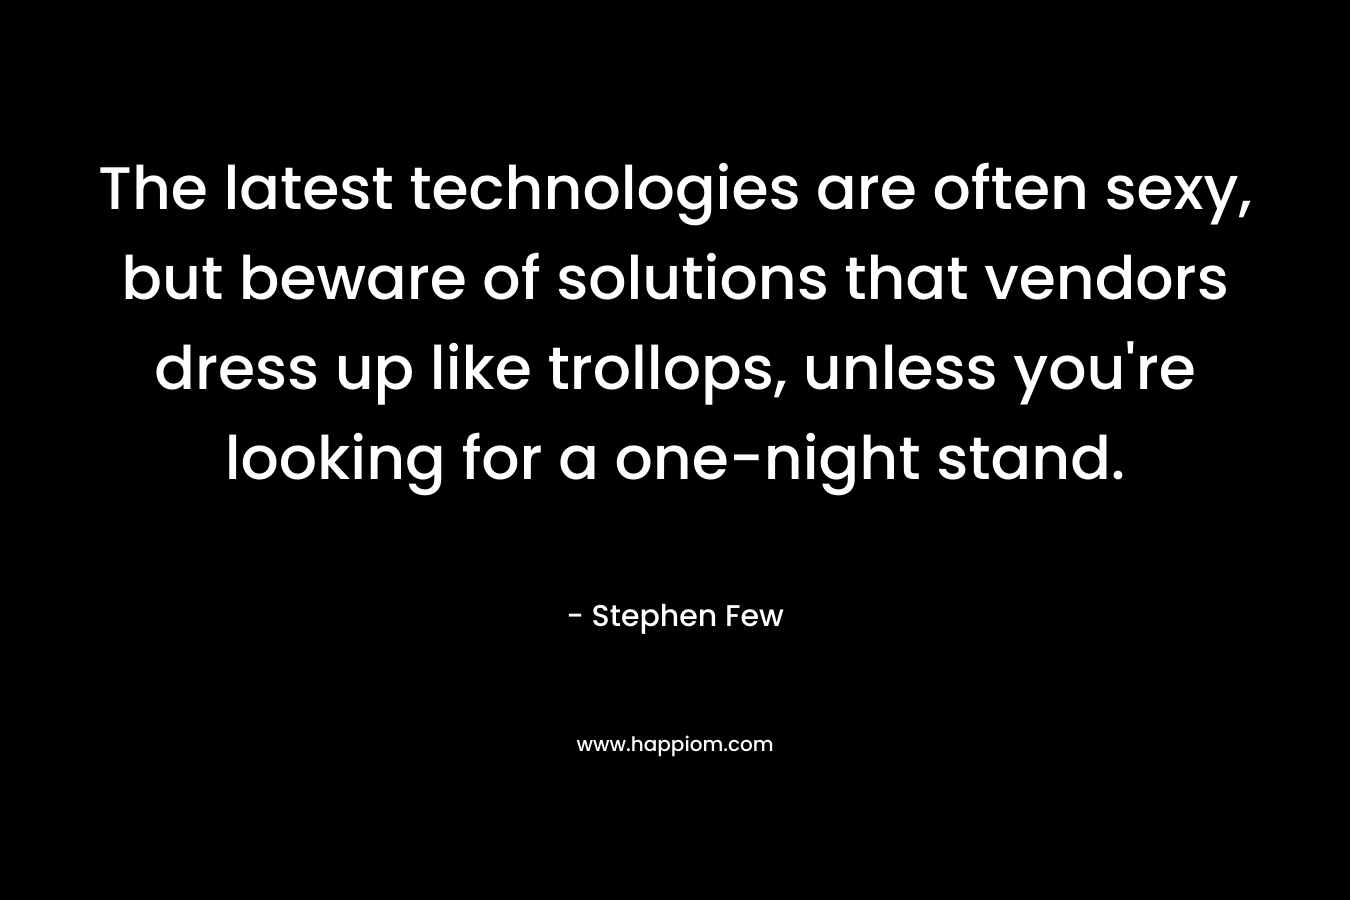 The latest technologies are often sexy, but beware of solutions that vendors dress up like trollops, unless you’re looking for a one-night stand. – Stephen Few